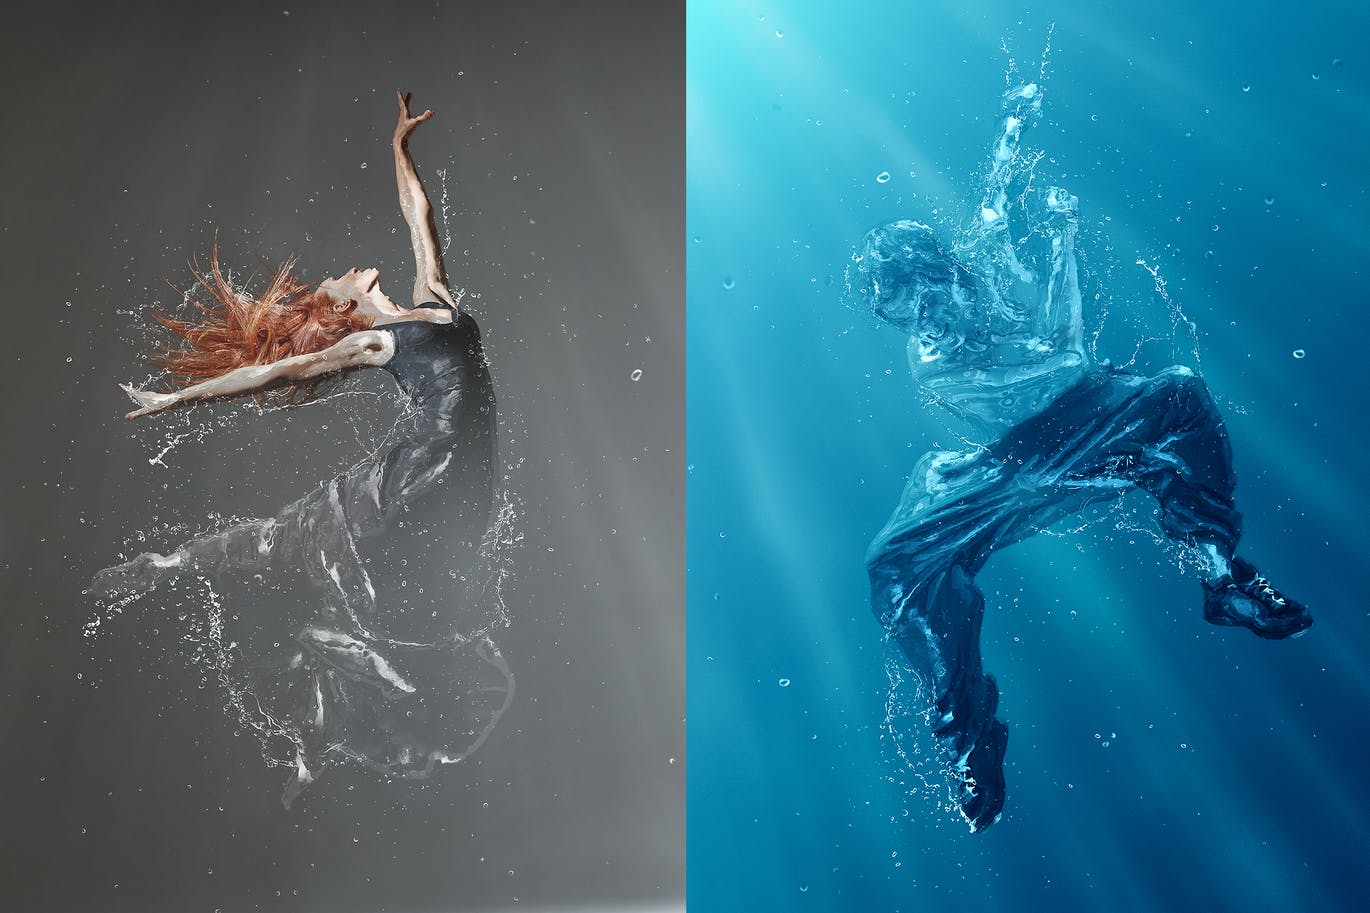 Water-Photoshop-Action 50+ Best Photoshop Actions of 2020 design tips Inspiration|actions|photoshop 